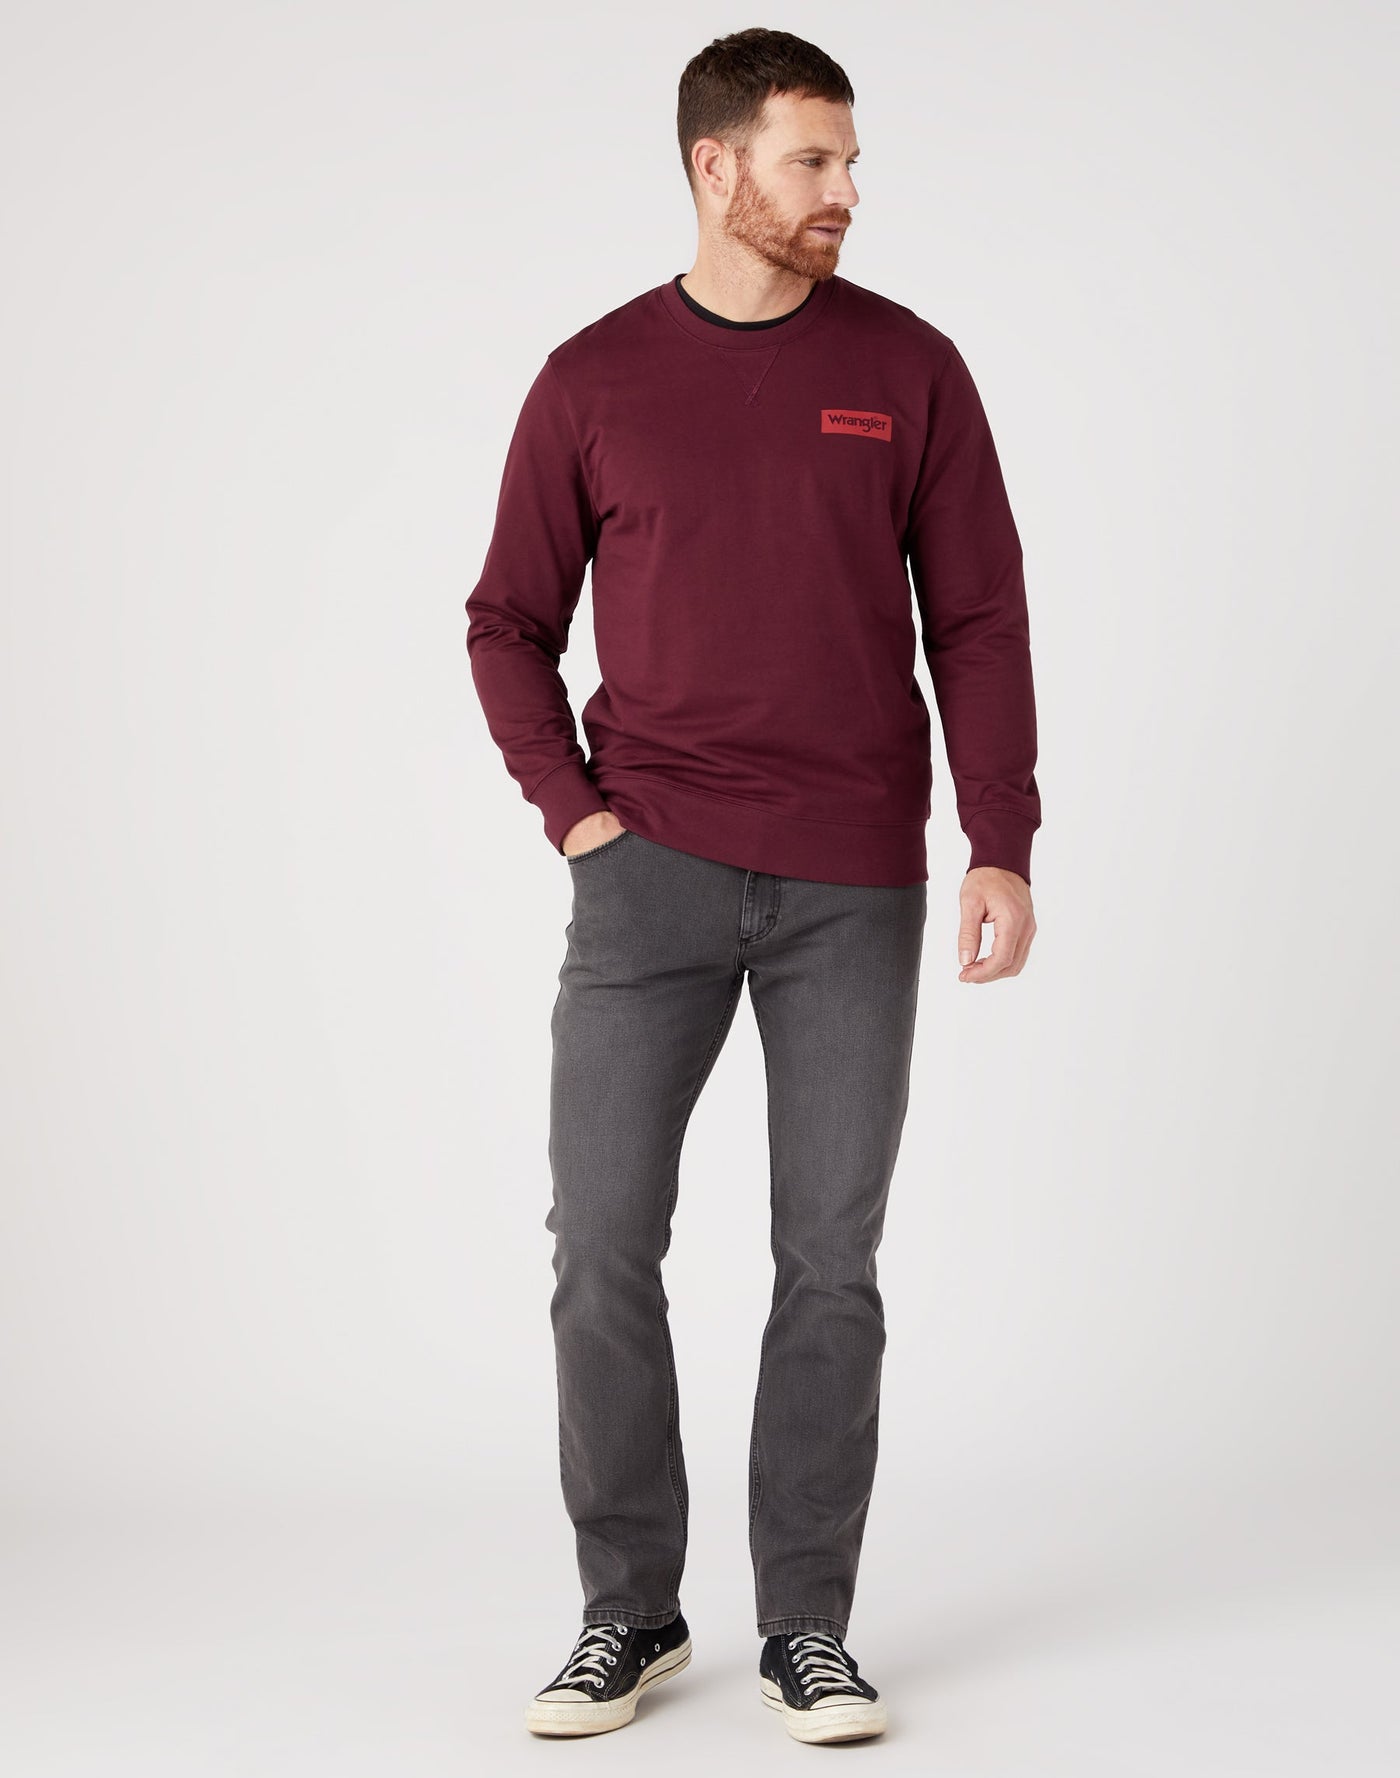 Regular Low Stretch in Authentic Grey Jeans Wrangler   